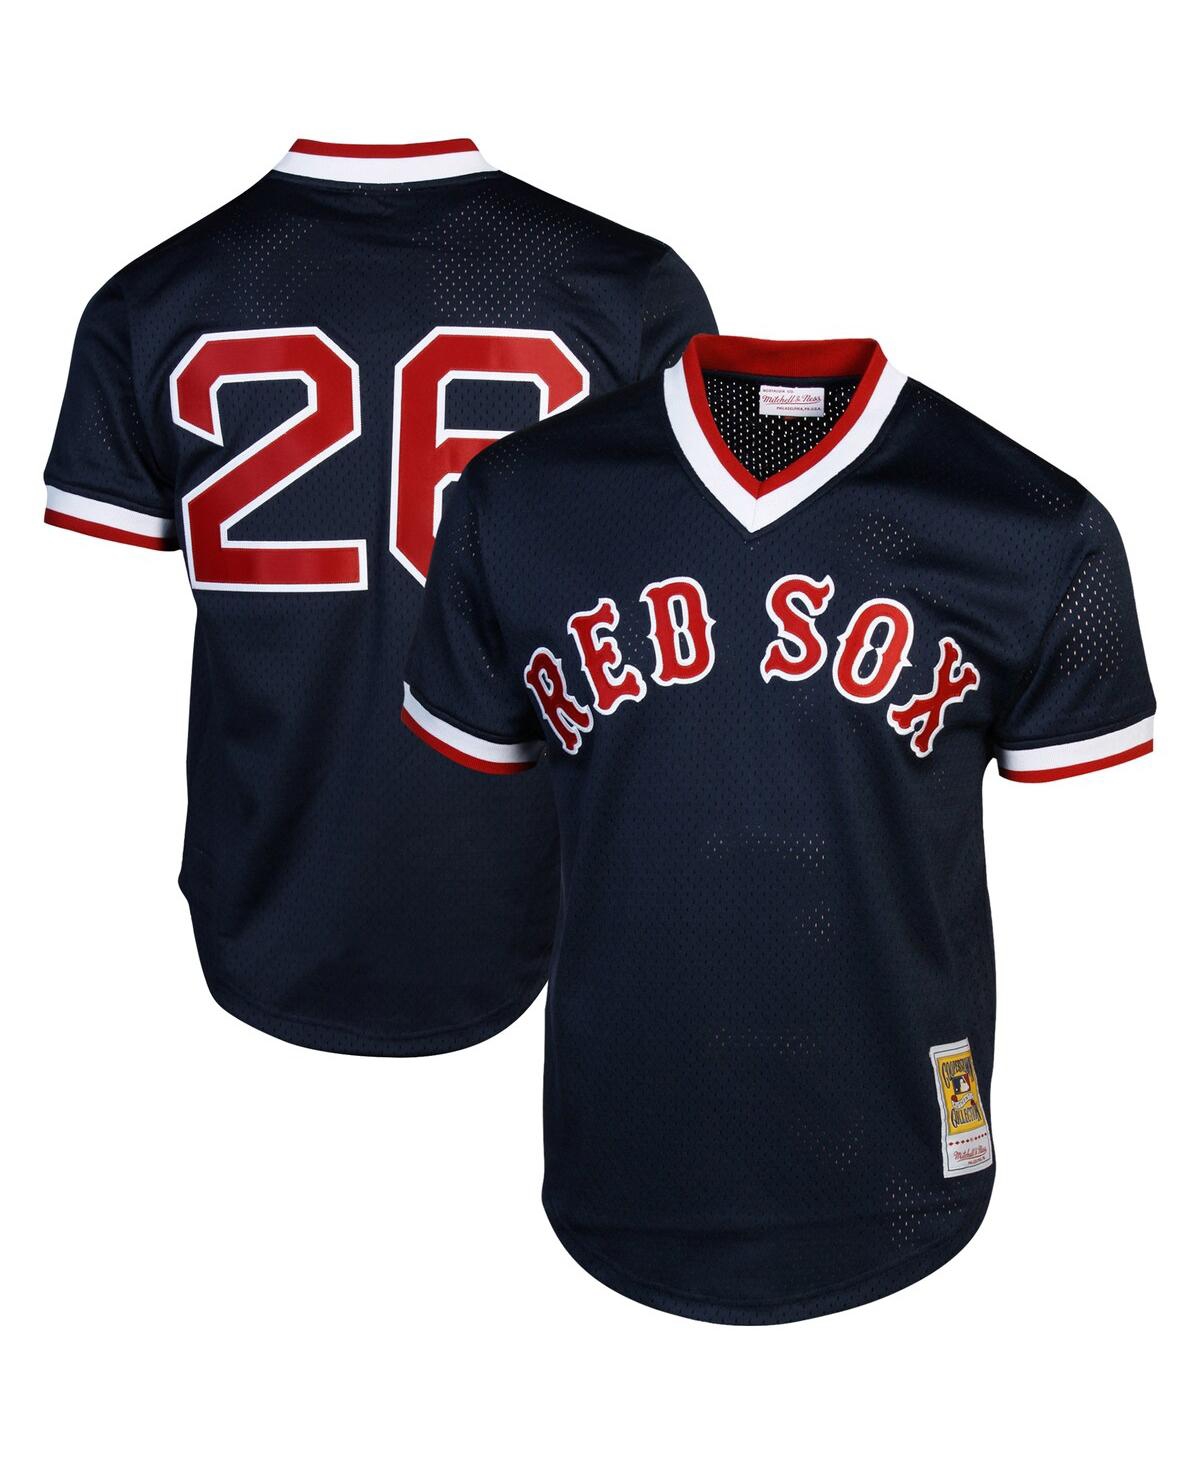 Men's Wade Boggs Boston Red Sox 1992 Authentic Cooperstown Collection Batting Practice Jersey - Navy Blue - Navy